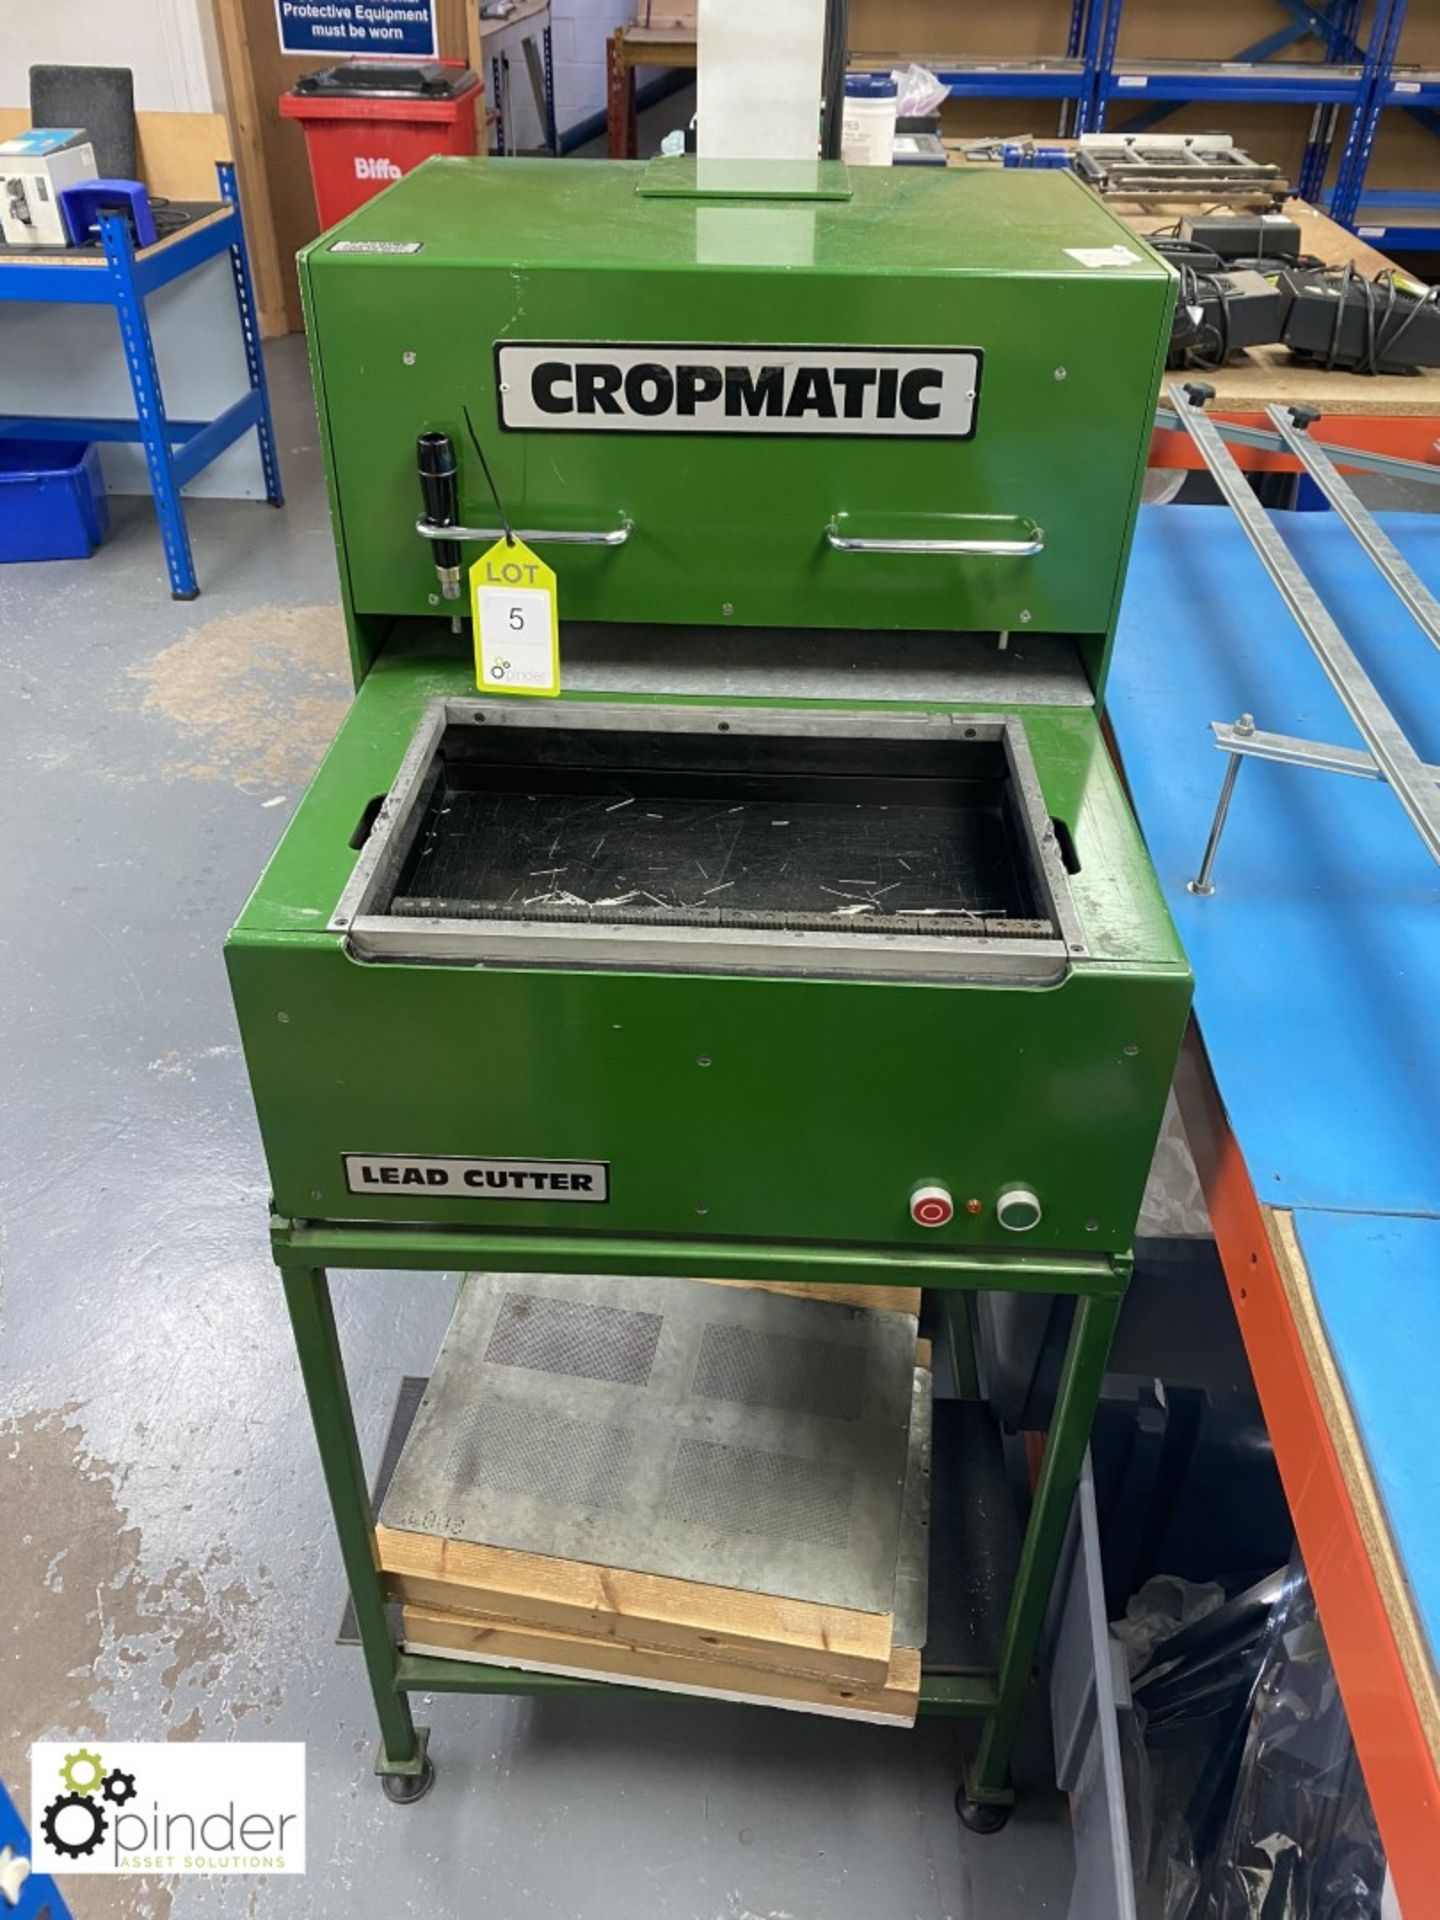 Cropmatic MC Component Cropping Machine, serial number 274, 415volts - Image 2 of 6